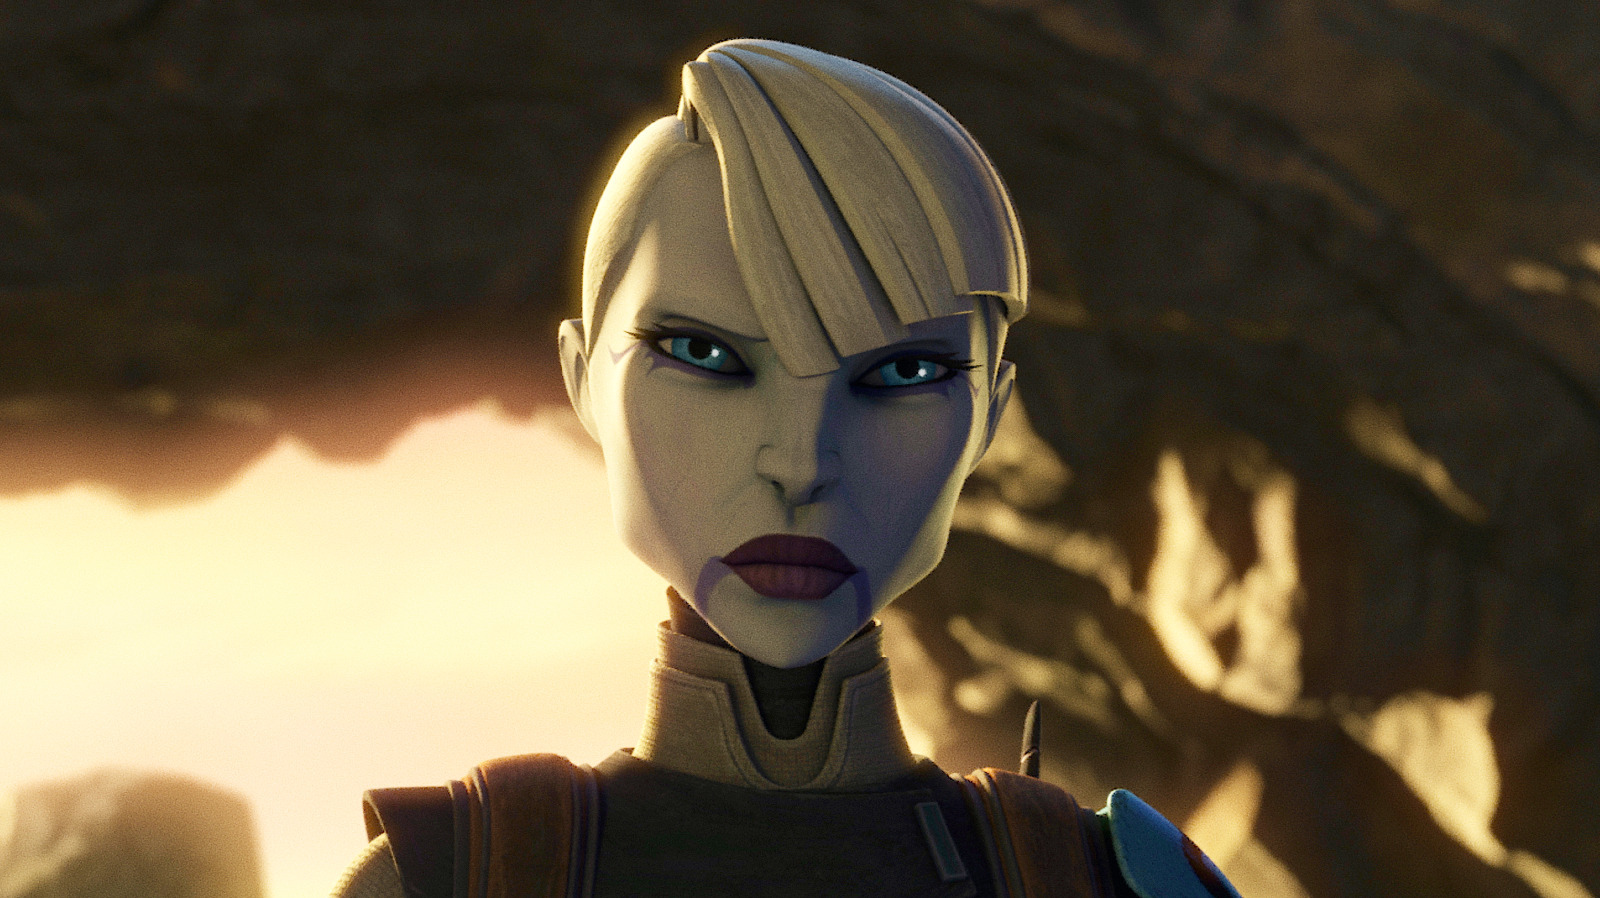 How Is Asajj Ventress Still Alive? Another Star Wars Show May Hold The
Answer